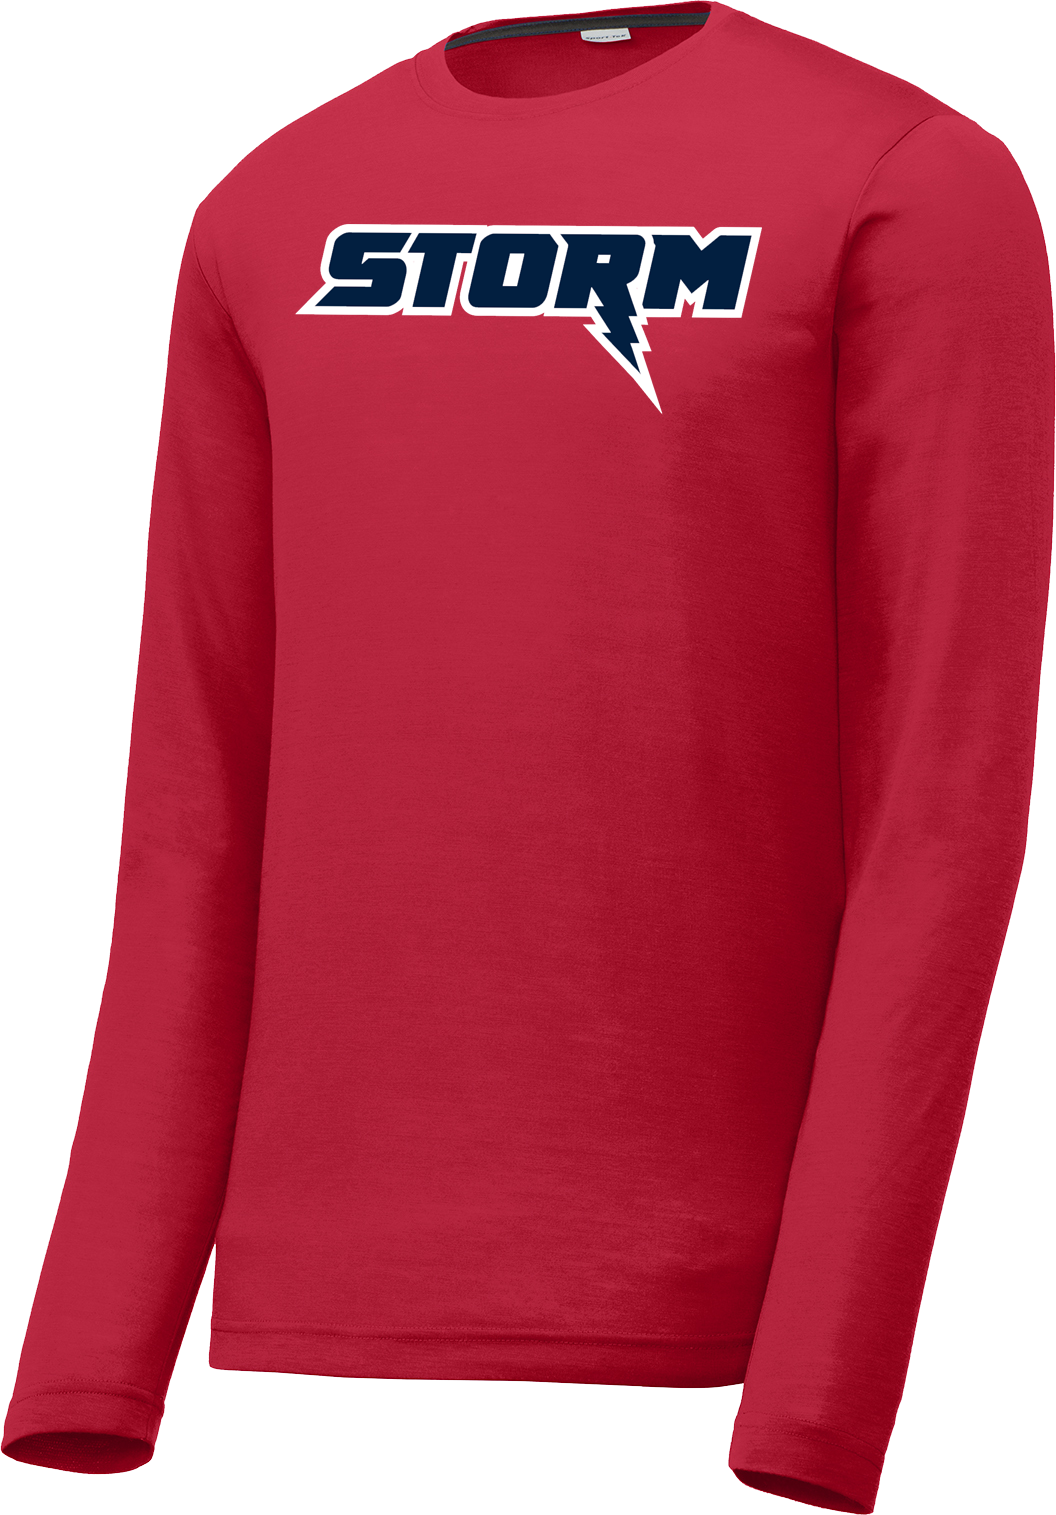 Oak Mountain Youth Lacrosse Red Long Sleeve CottonTouch Performance Shirt